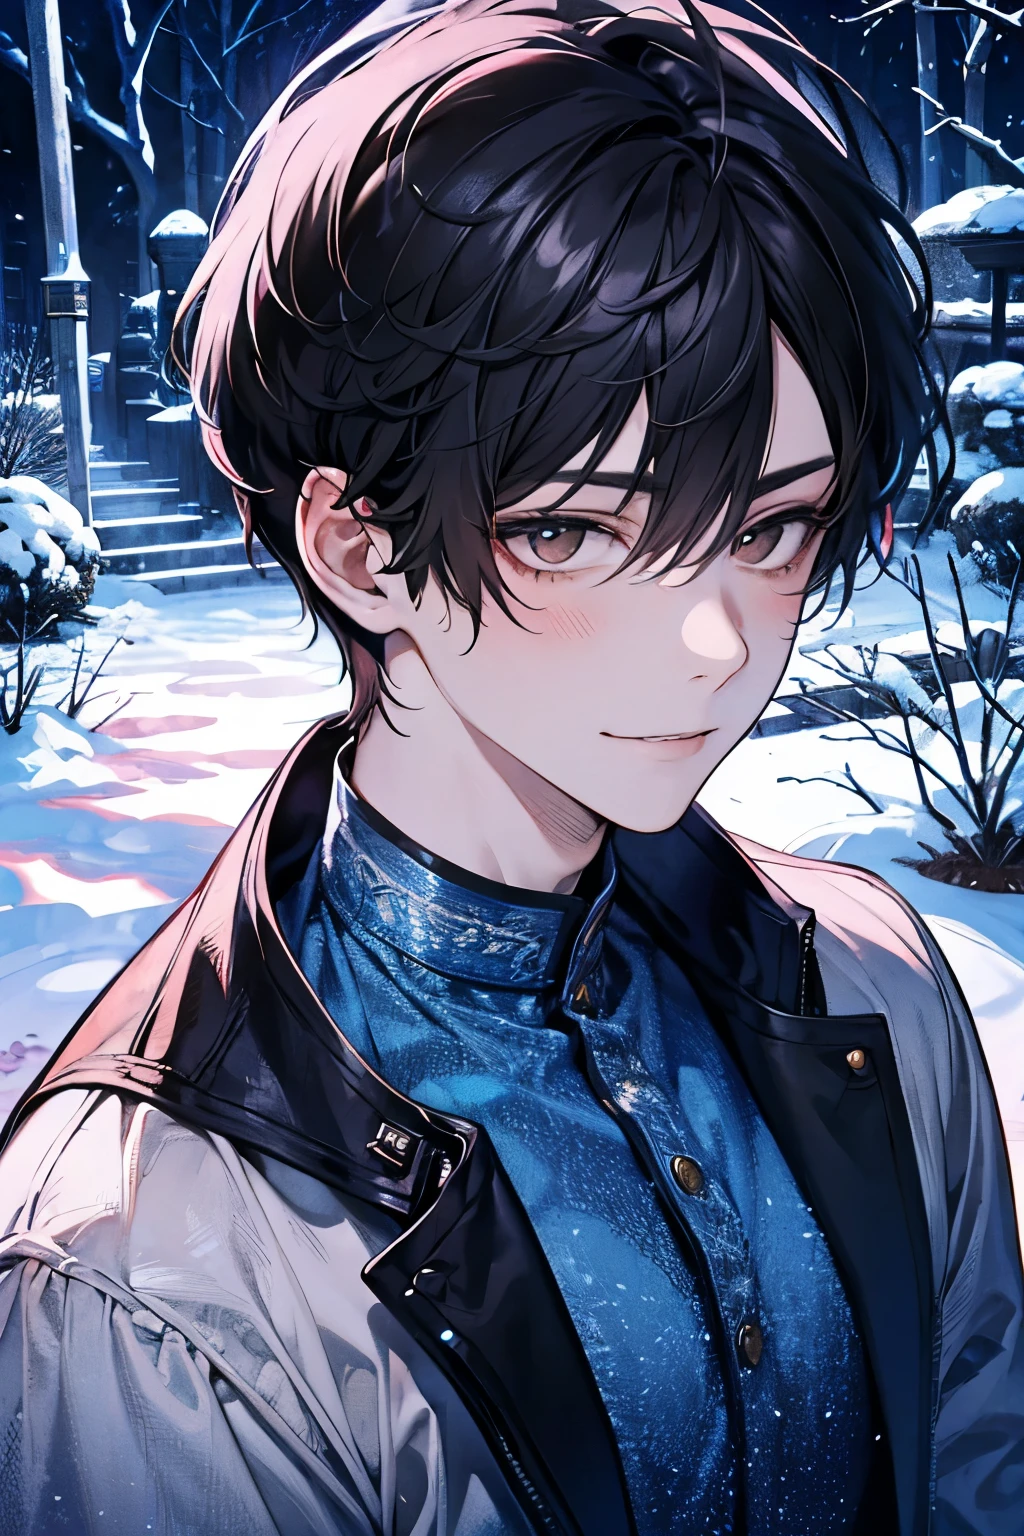 A handsome young man. The moment just before he picks up a kisses it. A quiet garden covered with snow. The garden has a small pine tree and a stone lantern covered with snow, softly illuminated by the early morning light. His features are smooth black hair, styled in a denim and T-shirt style, and deep brown eyes that reflect the hopeful beginning,blush,Smile